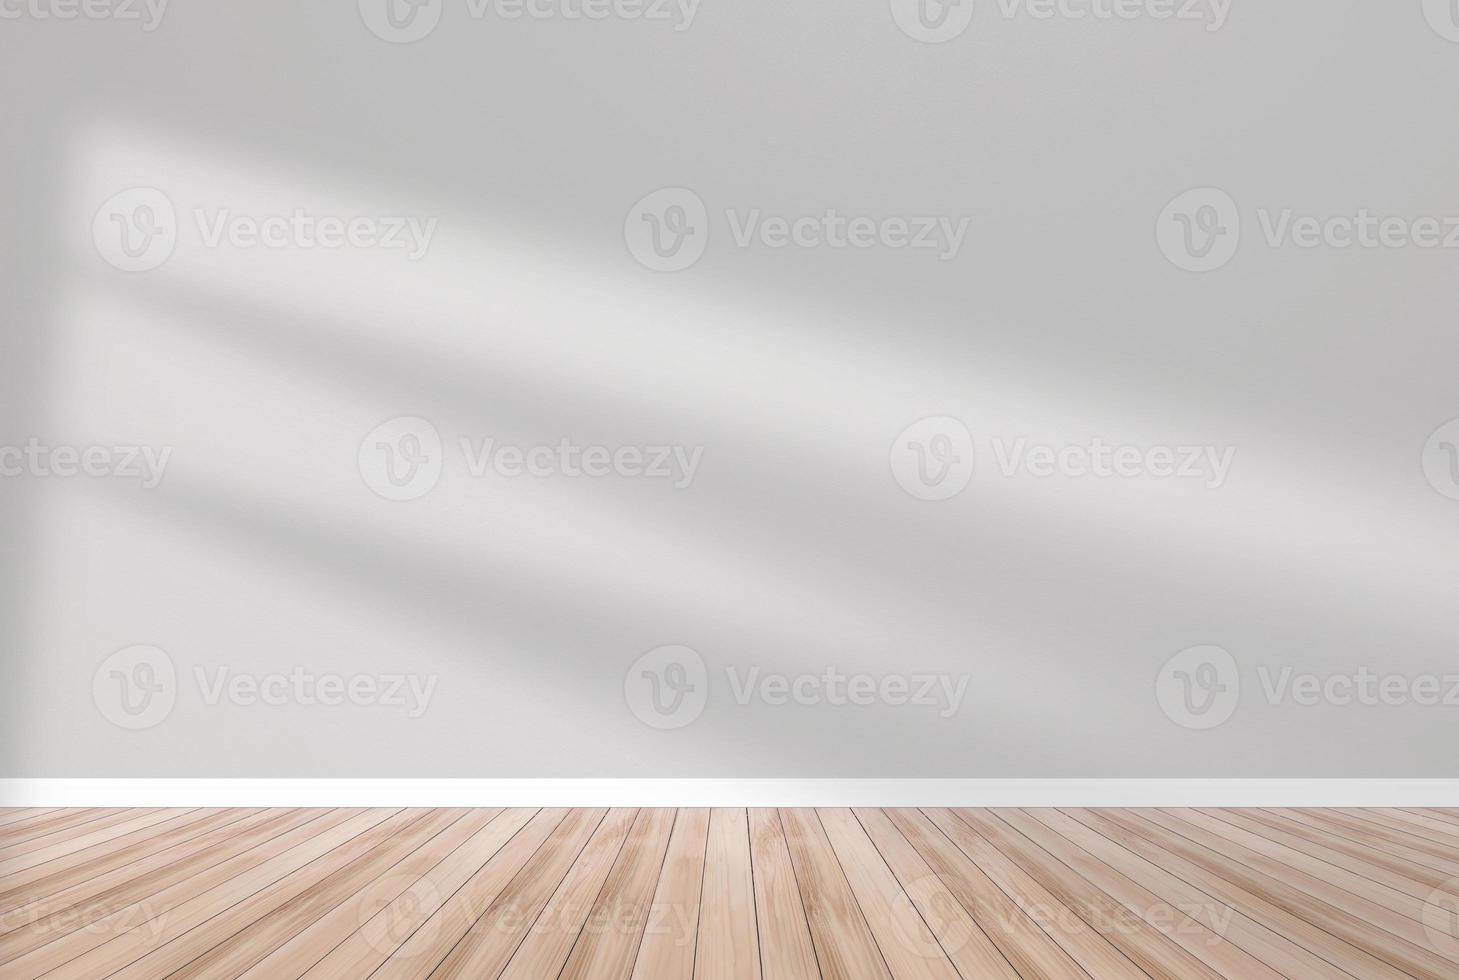 light and shadow decorative room background wooden floor abstract wallpaper backdrop design photo